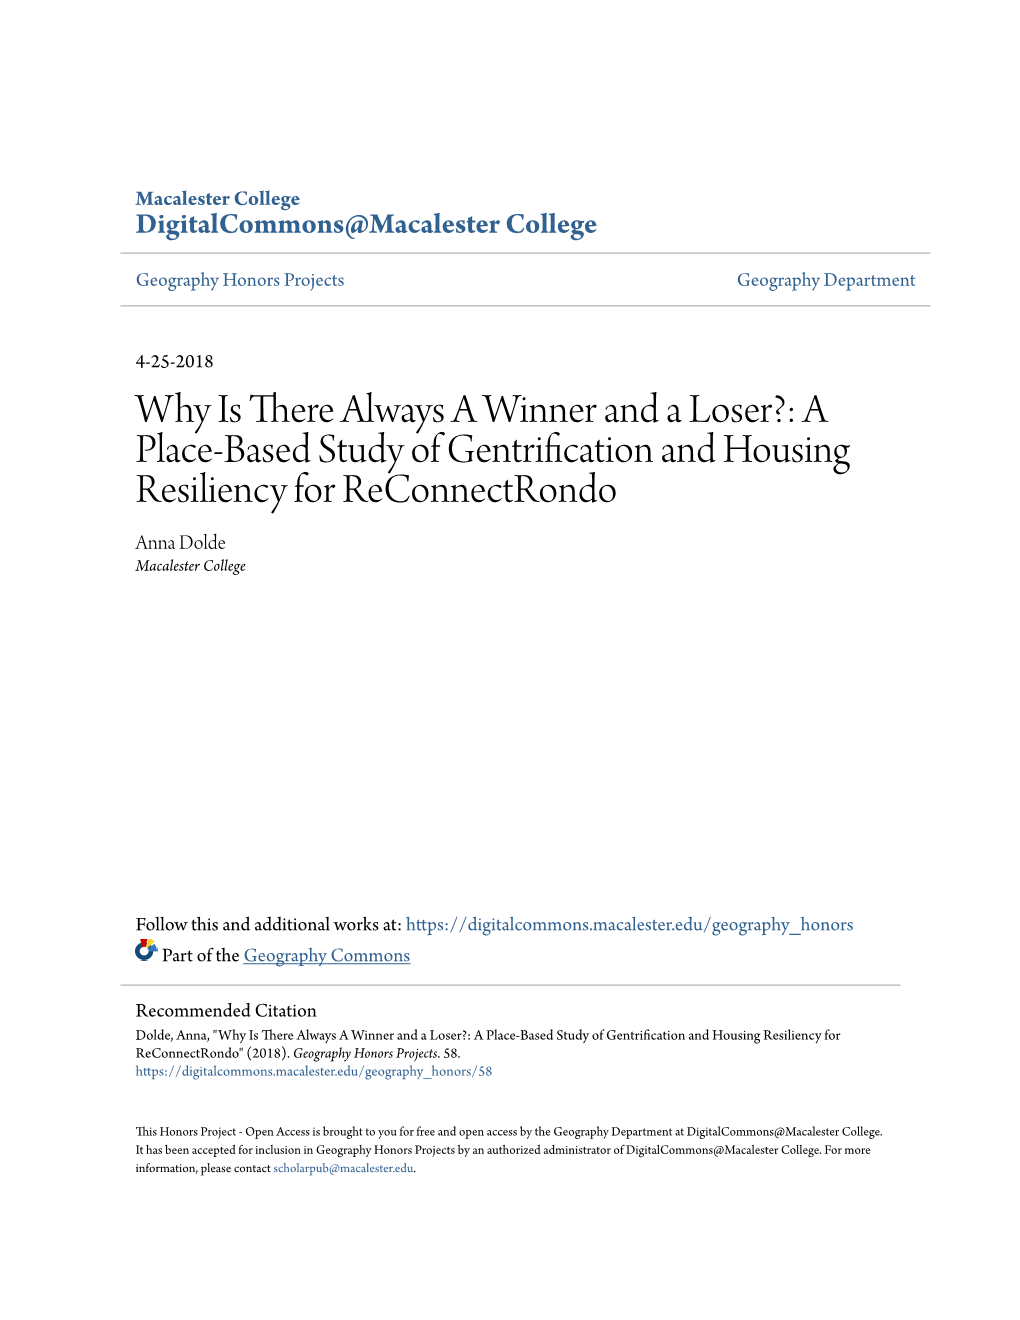 Why Is There Always a Winner and a Loser?: a Place-Based Study of Gentrification and Housing Resiliency for Reconnectrondo Anna Dolde Macalester College